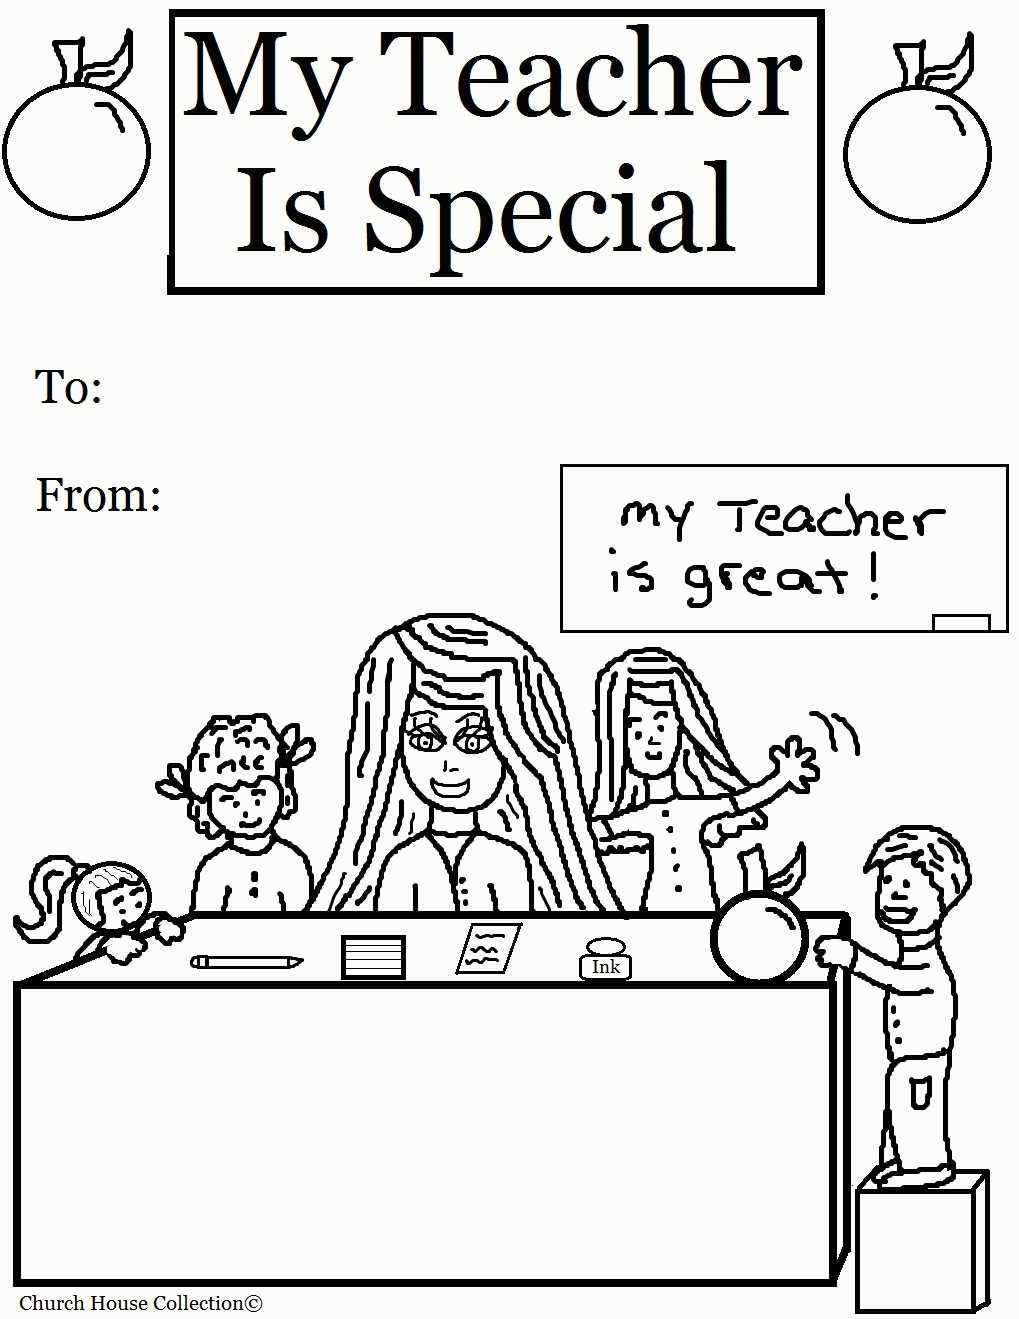 School House coloring pages, Coloring for kids, My teacher is ...